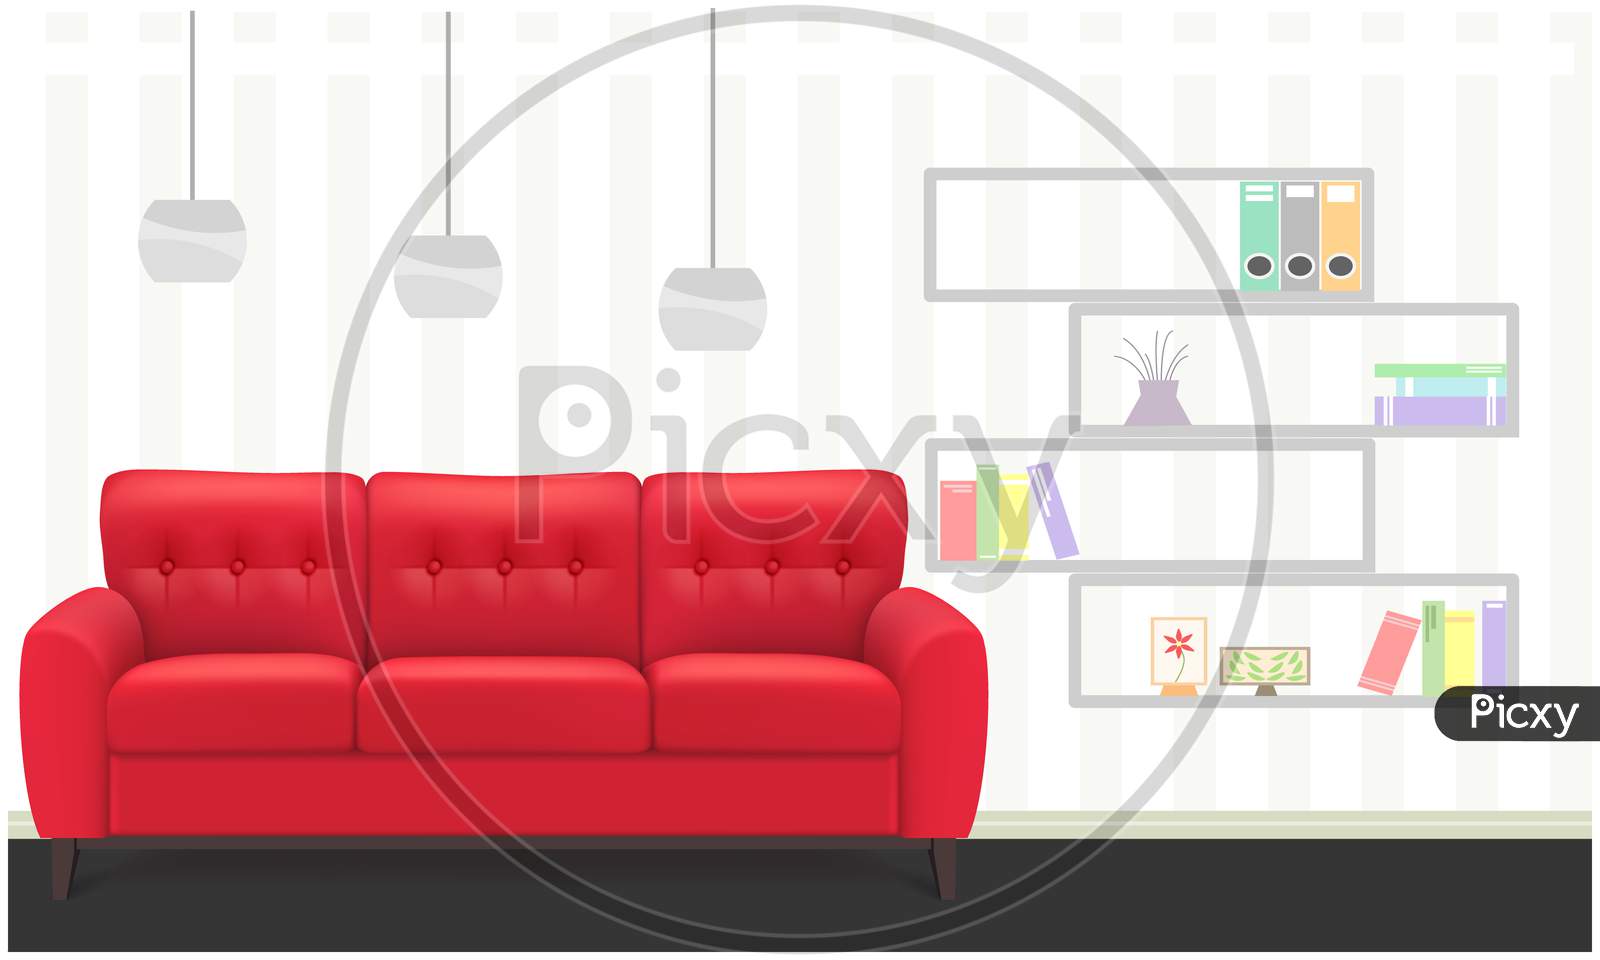 Mock Up Illustration Of Red Couch In A Living Room